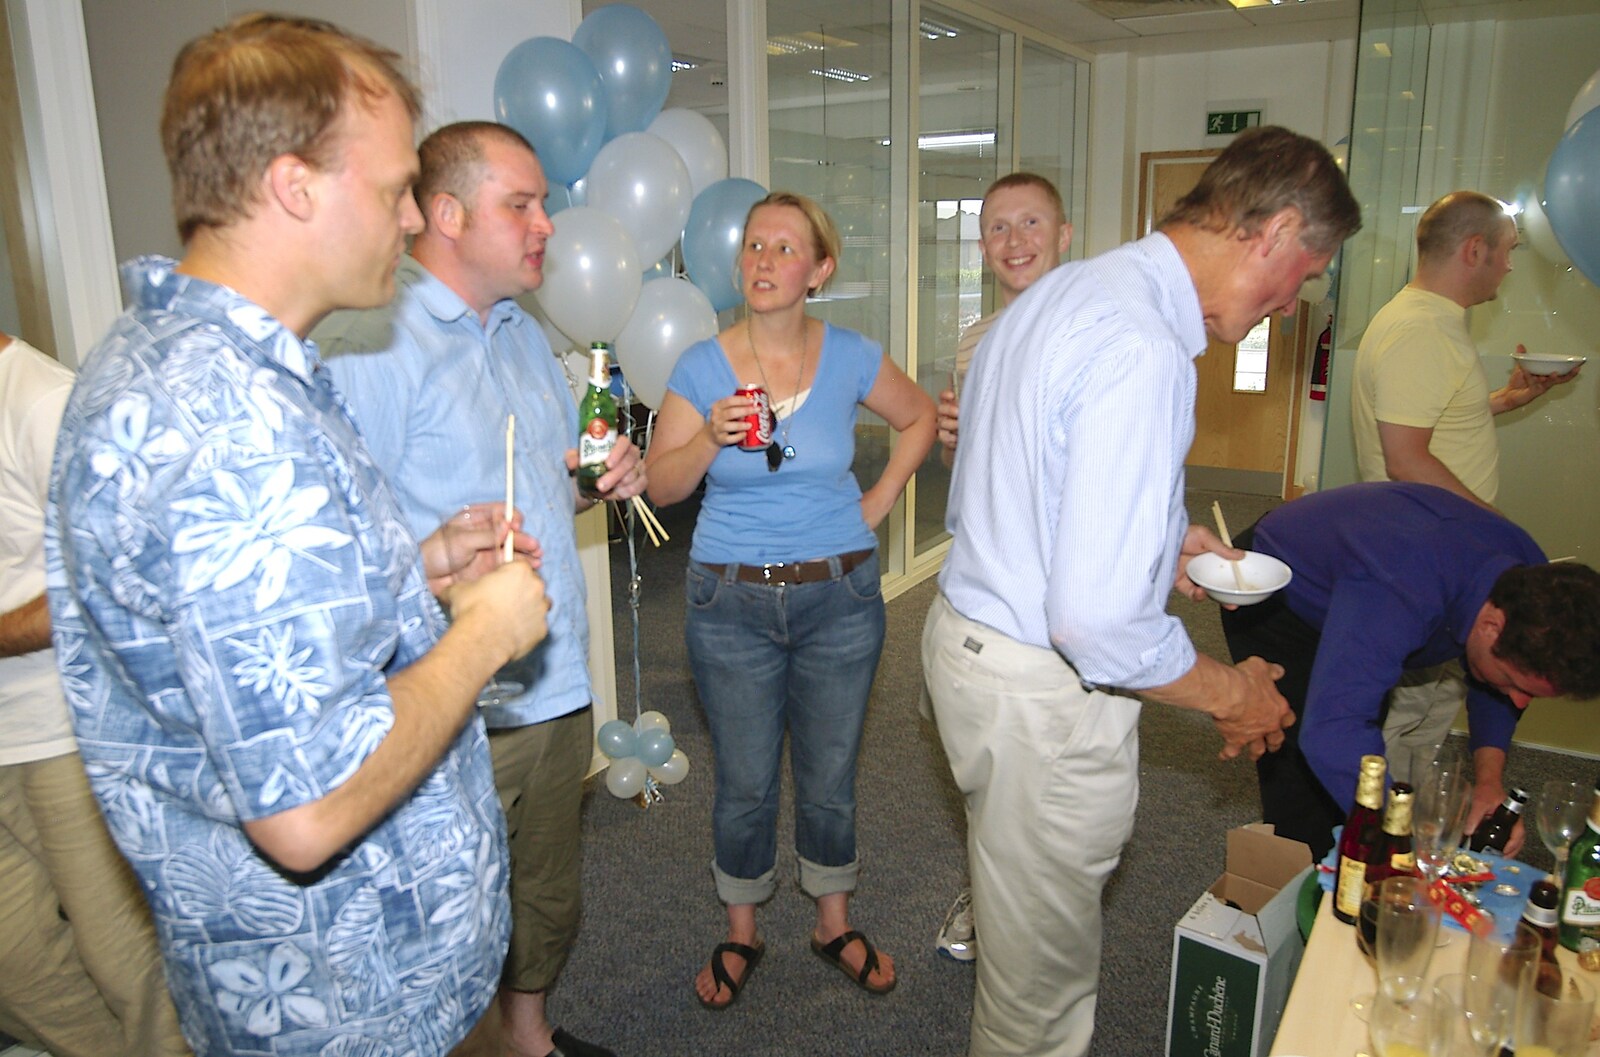 Chatting and mingling from Qualcomm's New Office Party, Science Park, Milton Road, Cambridge - 3rd July 2006